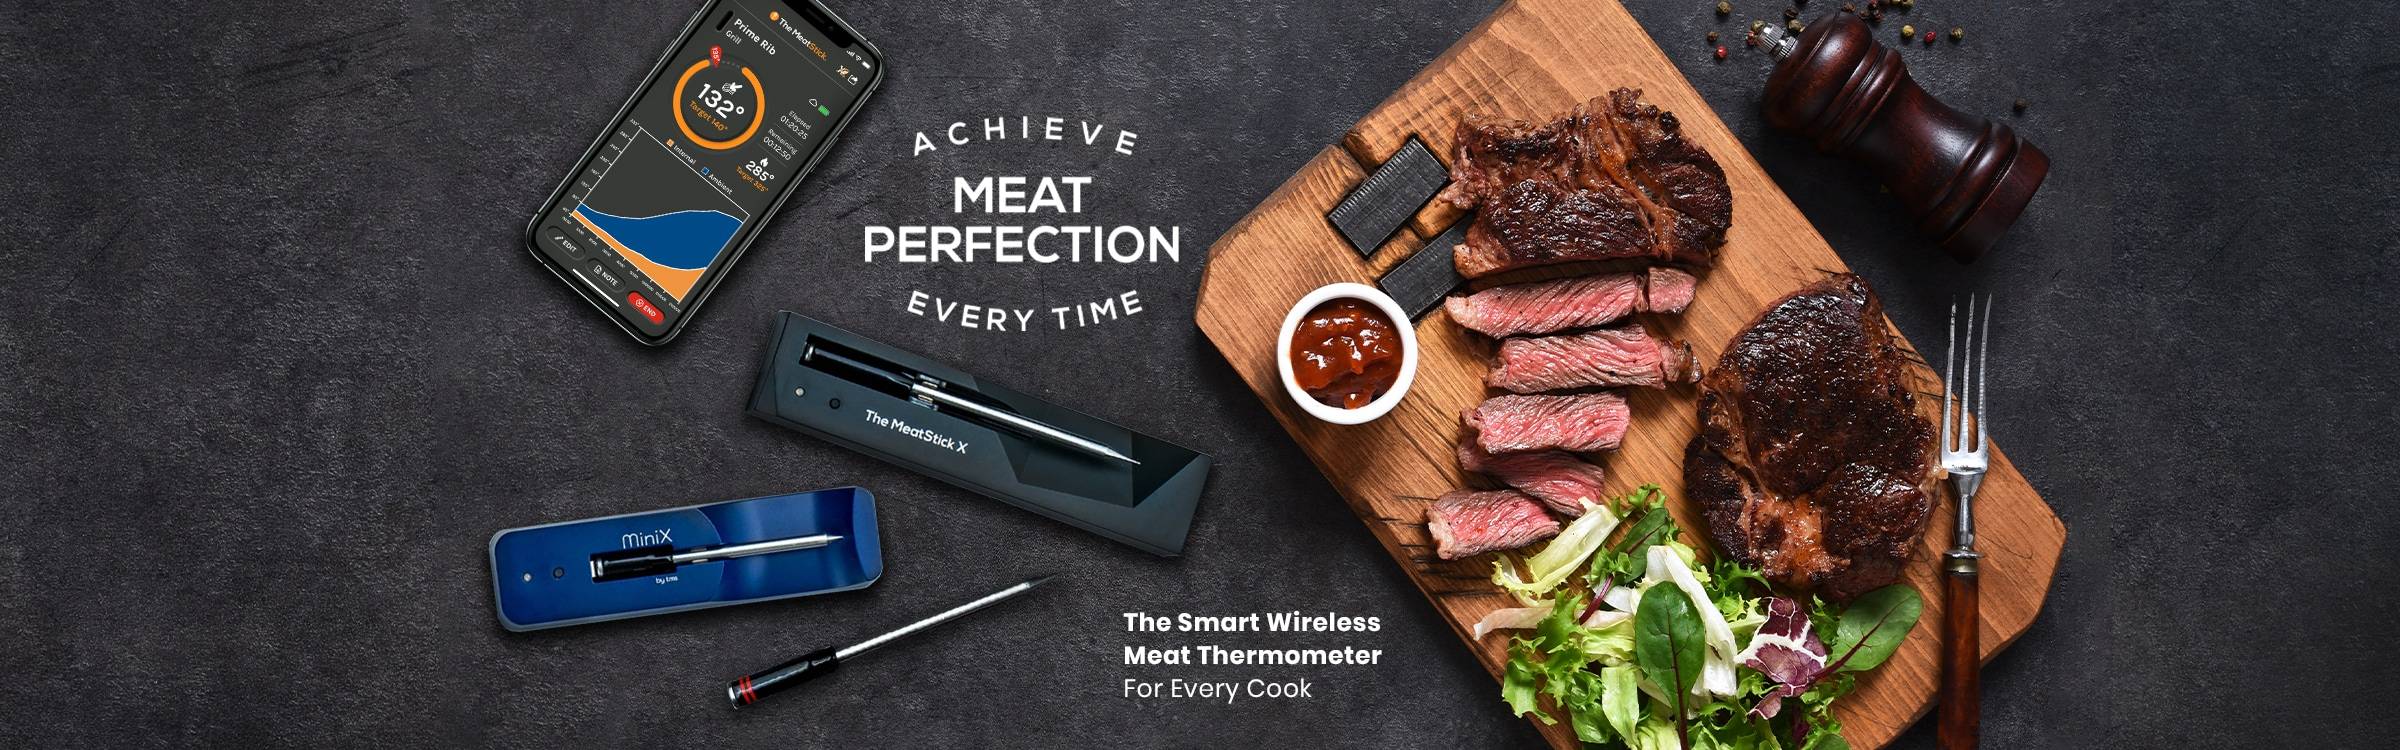 The MeatStick Smart Wireless Meat Thermometer for Every Cook